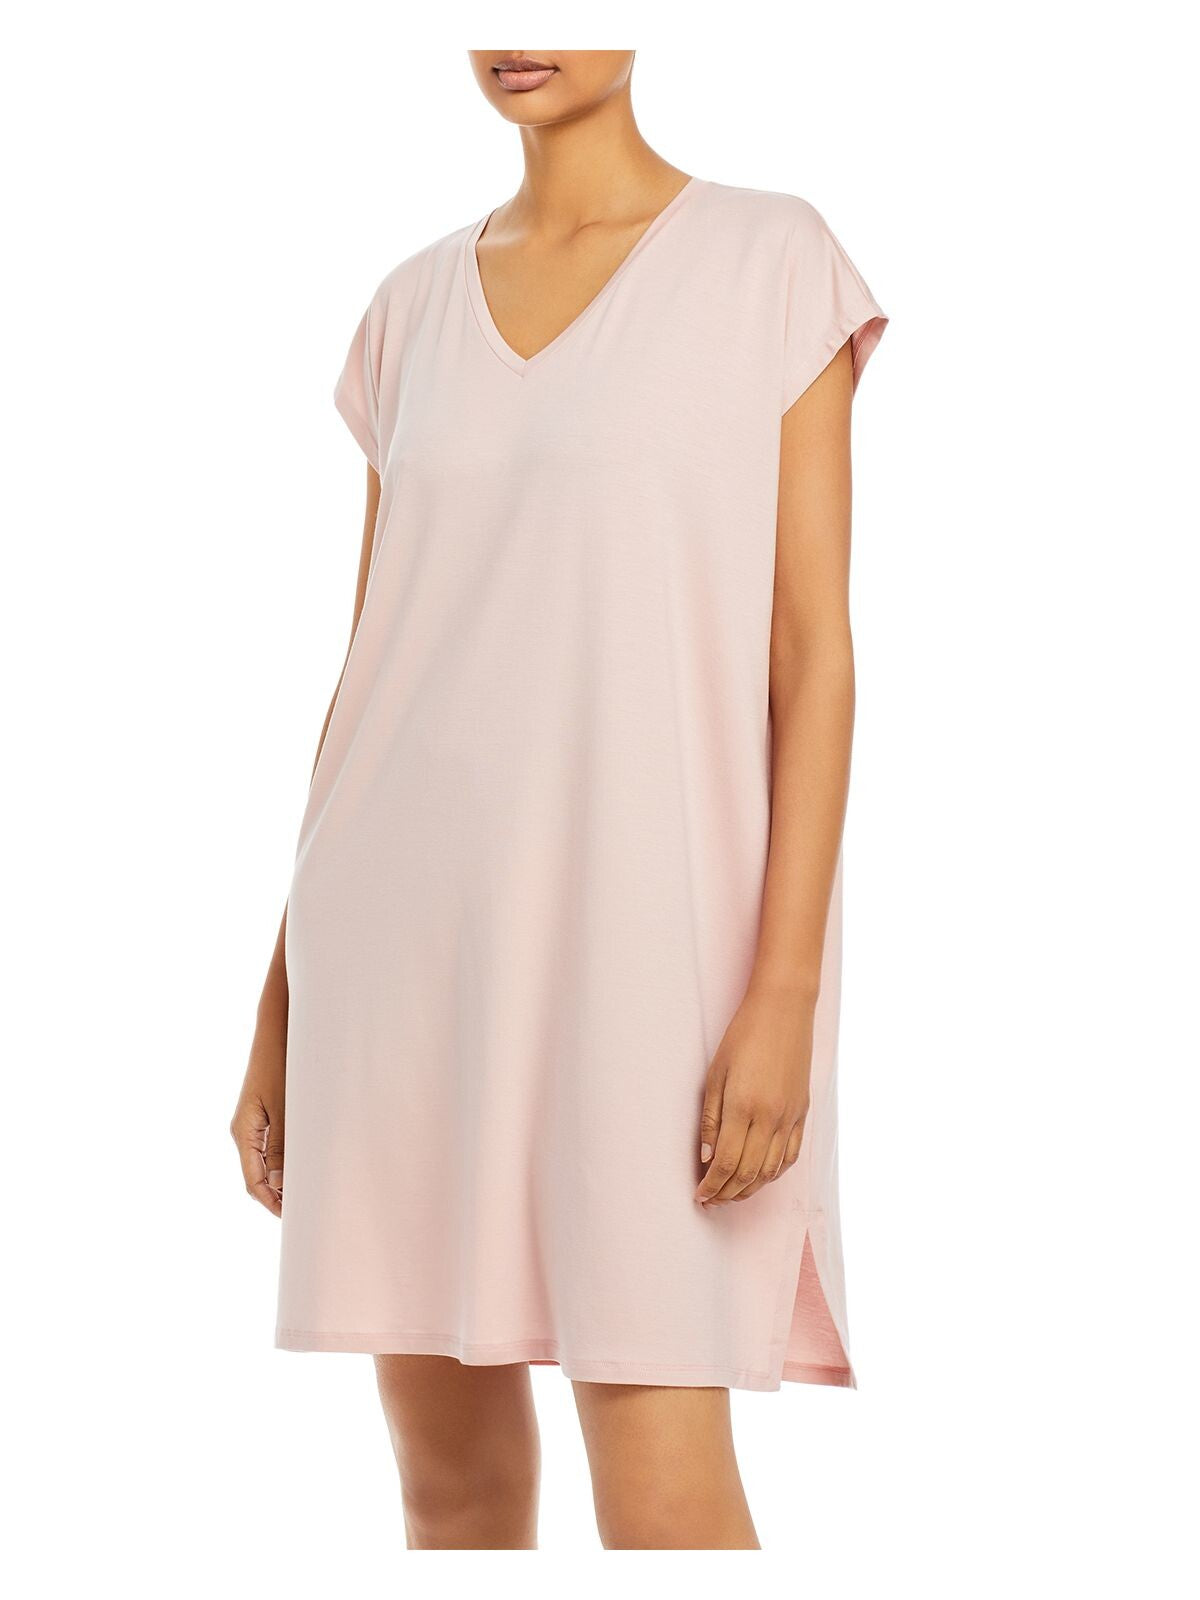 EILEEN FISHER Womens Pink Stretch Cap Sleeve V Neck Above The Knee Shift Dress M